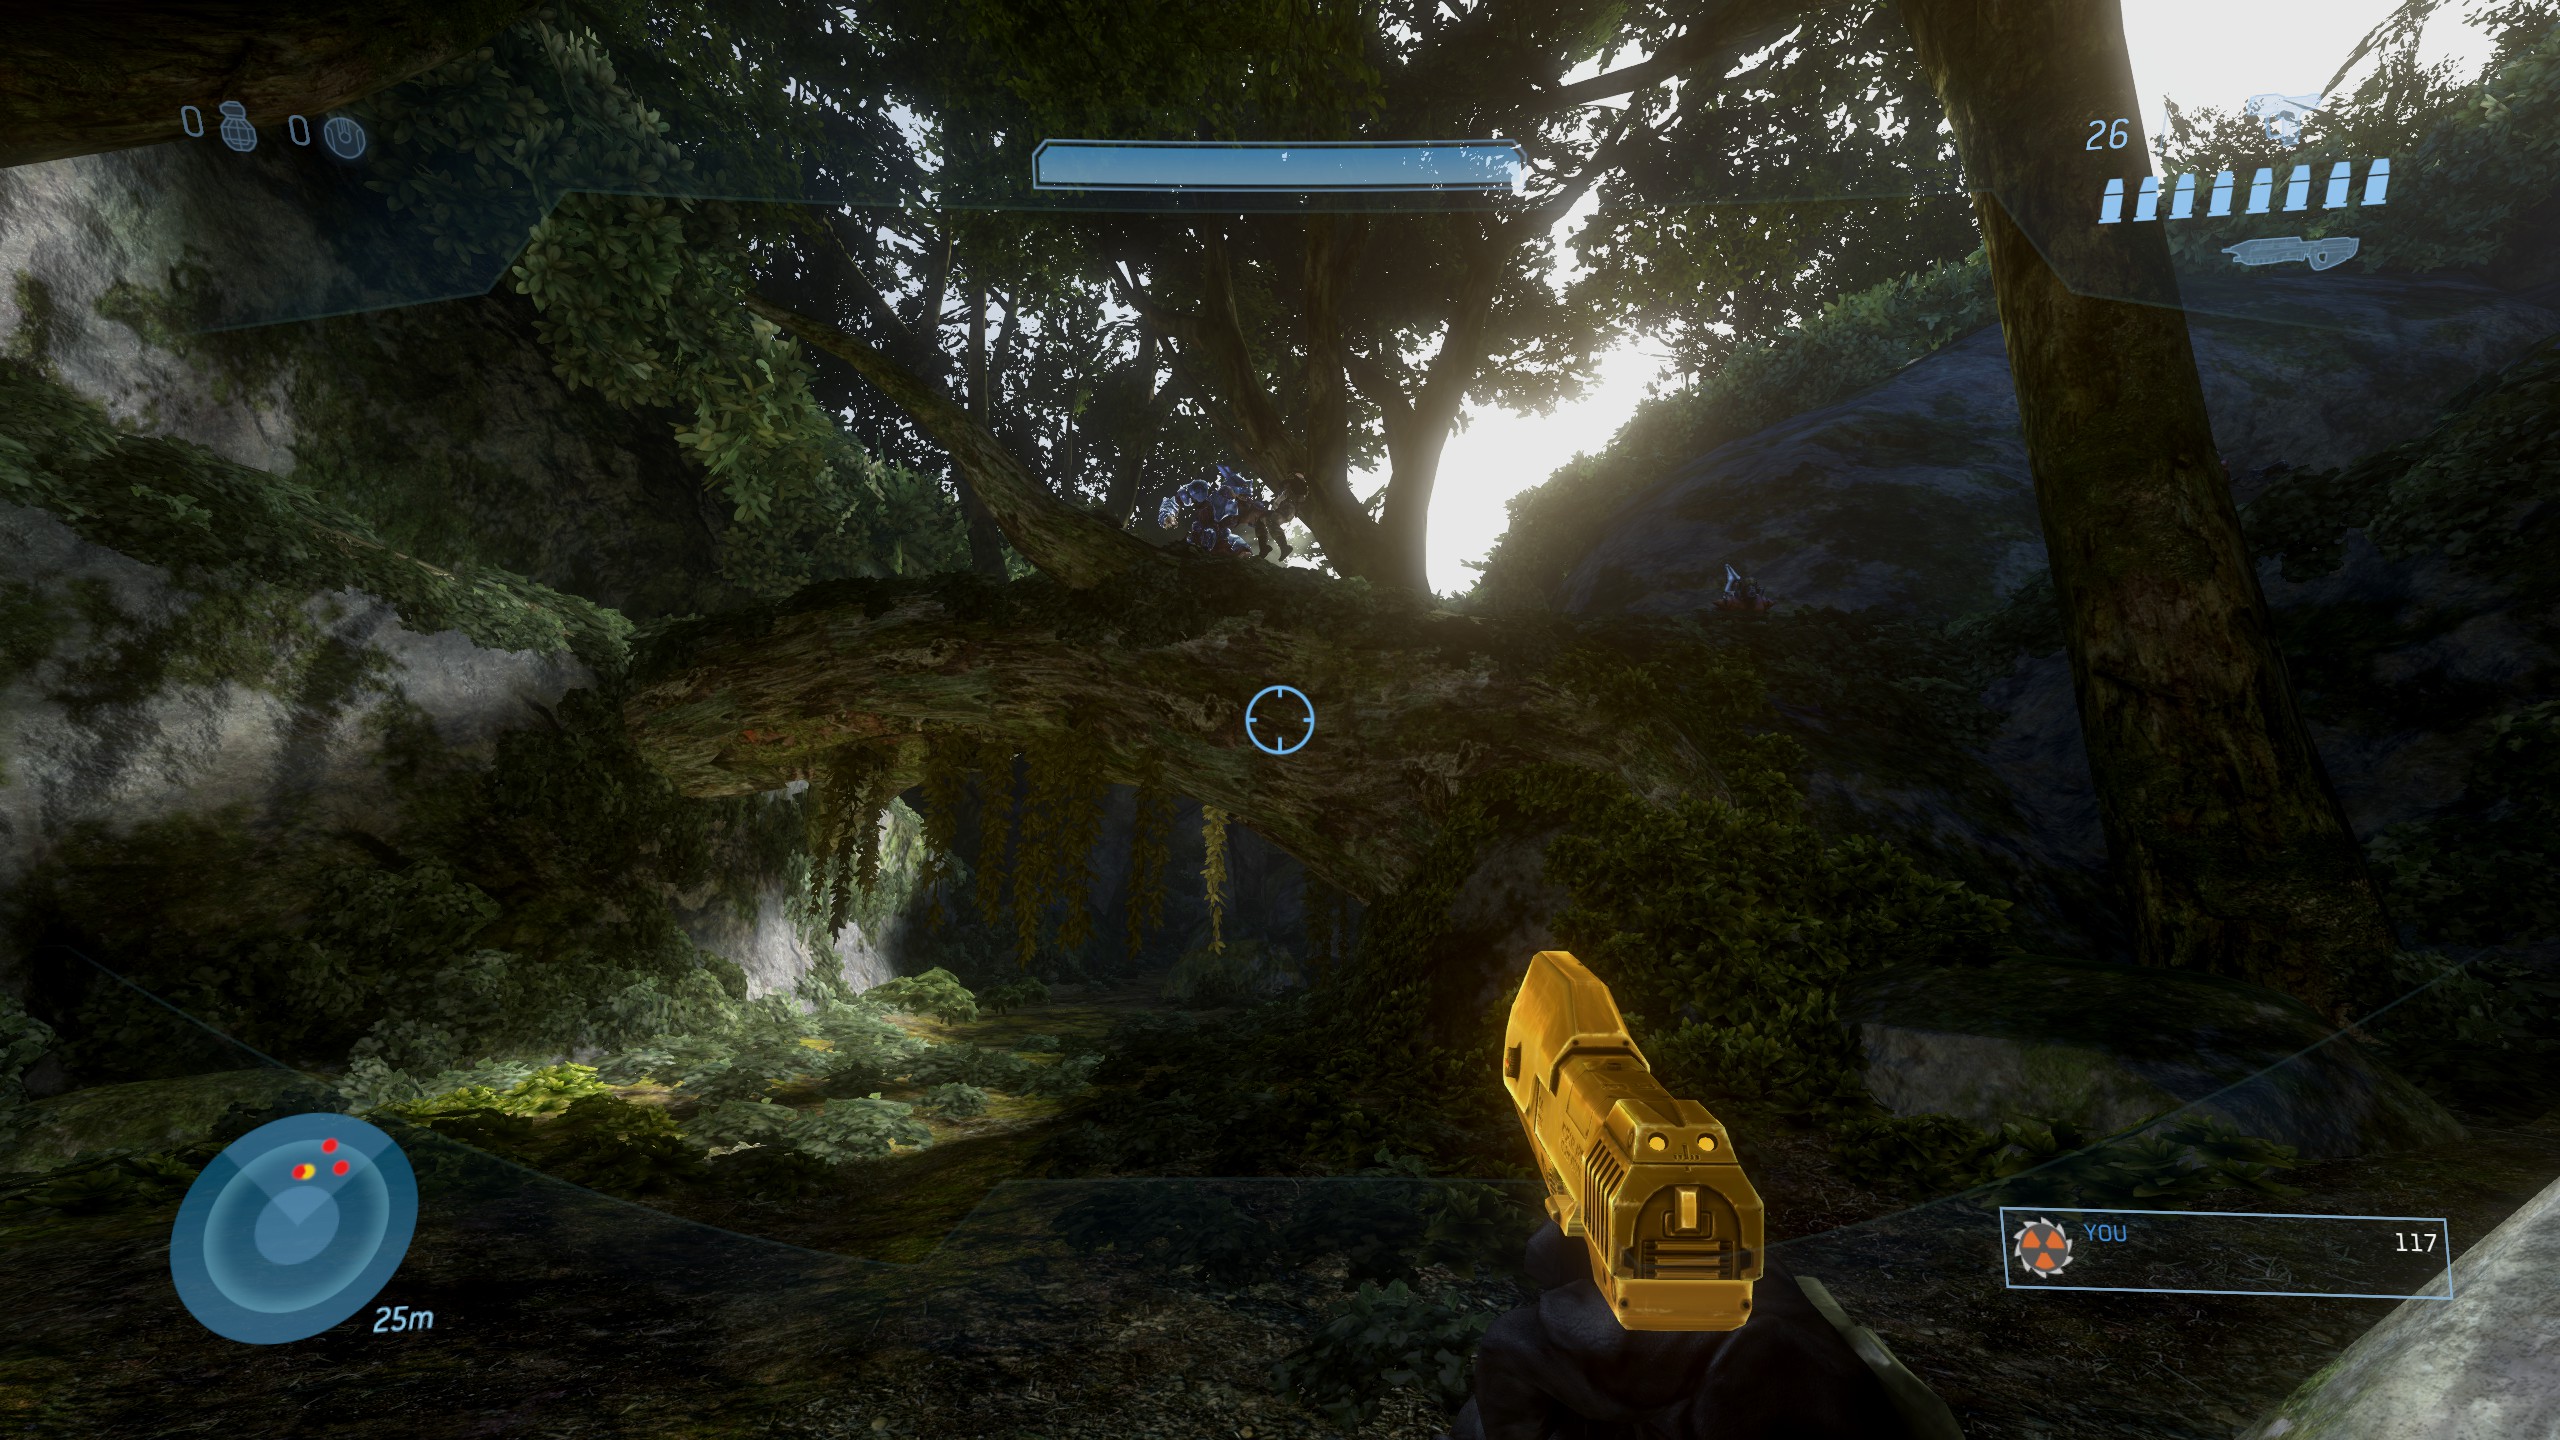 Halo: The Master Chief Collection - Golden Moa Statue Location Guide - Sierra 117 - B733E6D